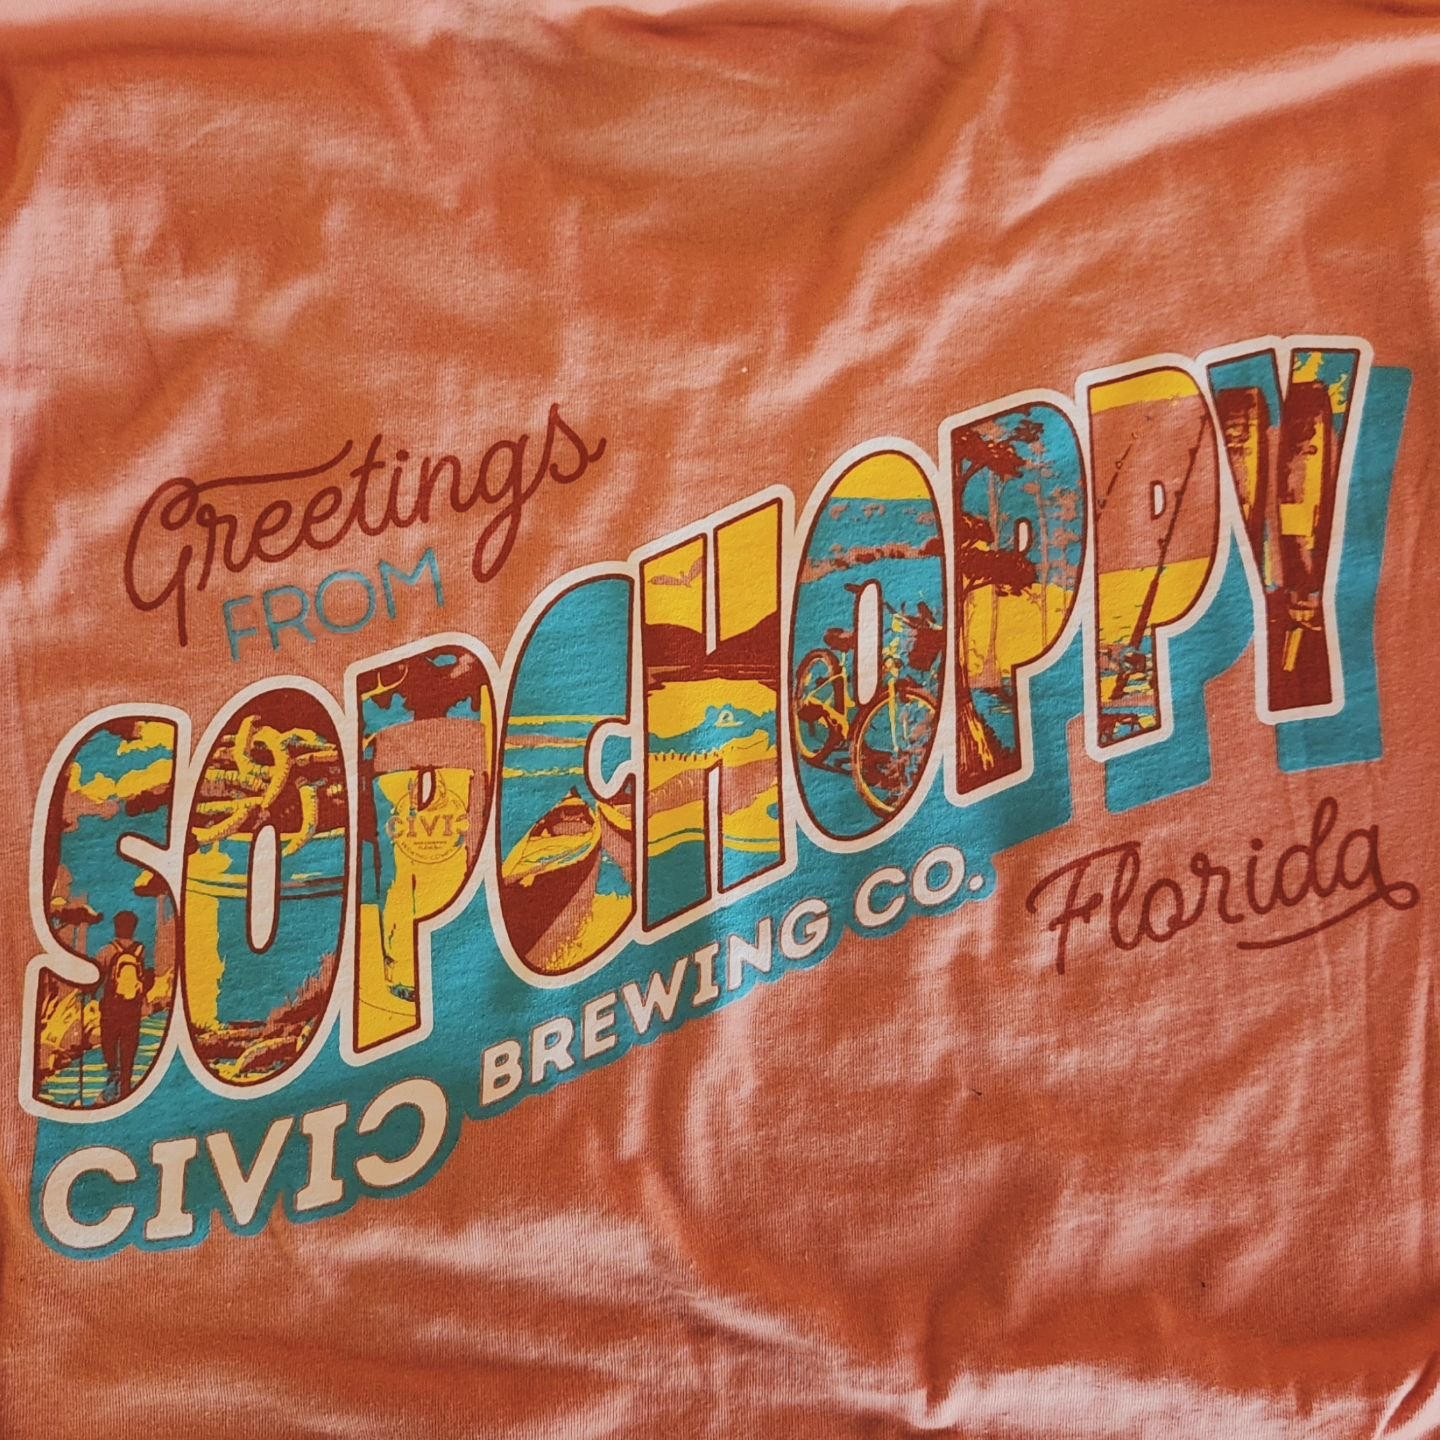 Happy Wednesday! Sopchoppy shirts are back in stock! @kpsfoodtruck Weds-Sat this week!